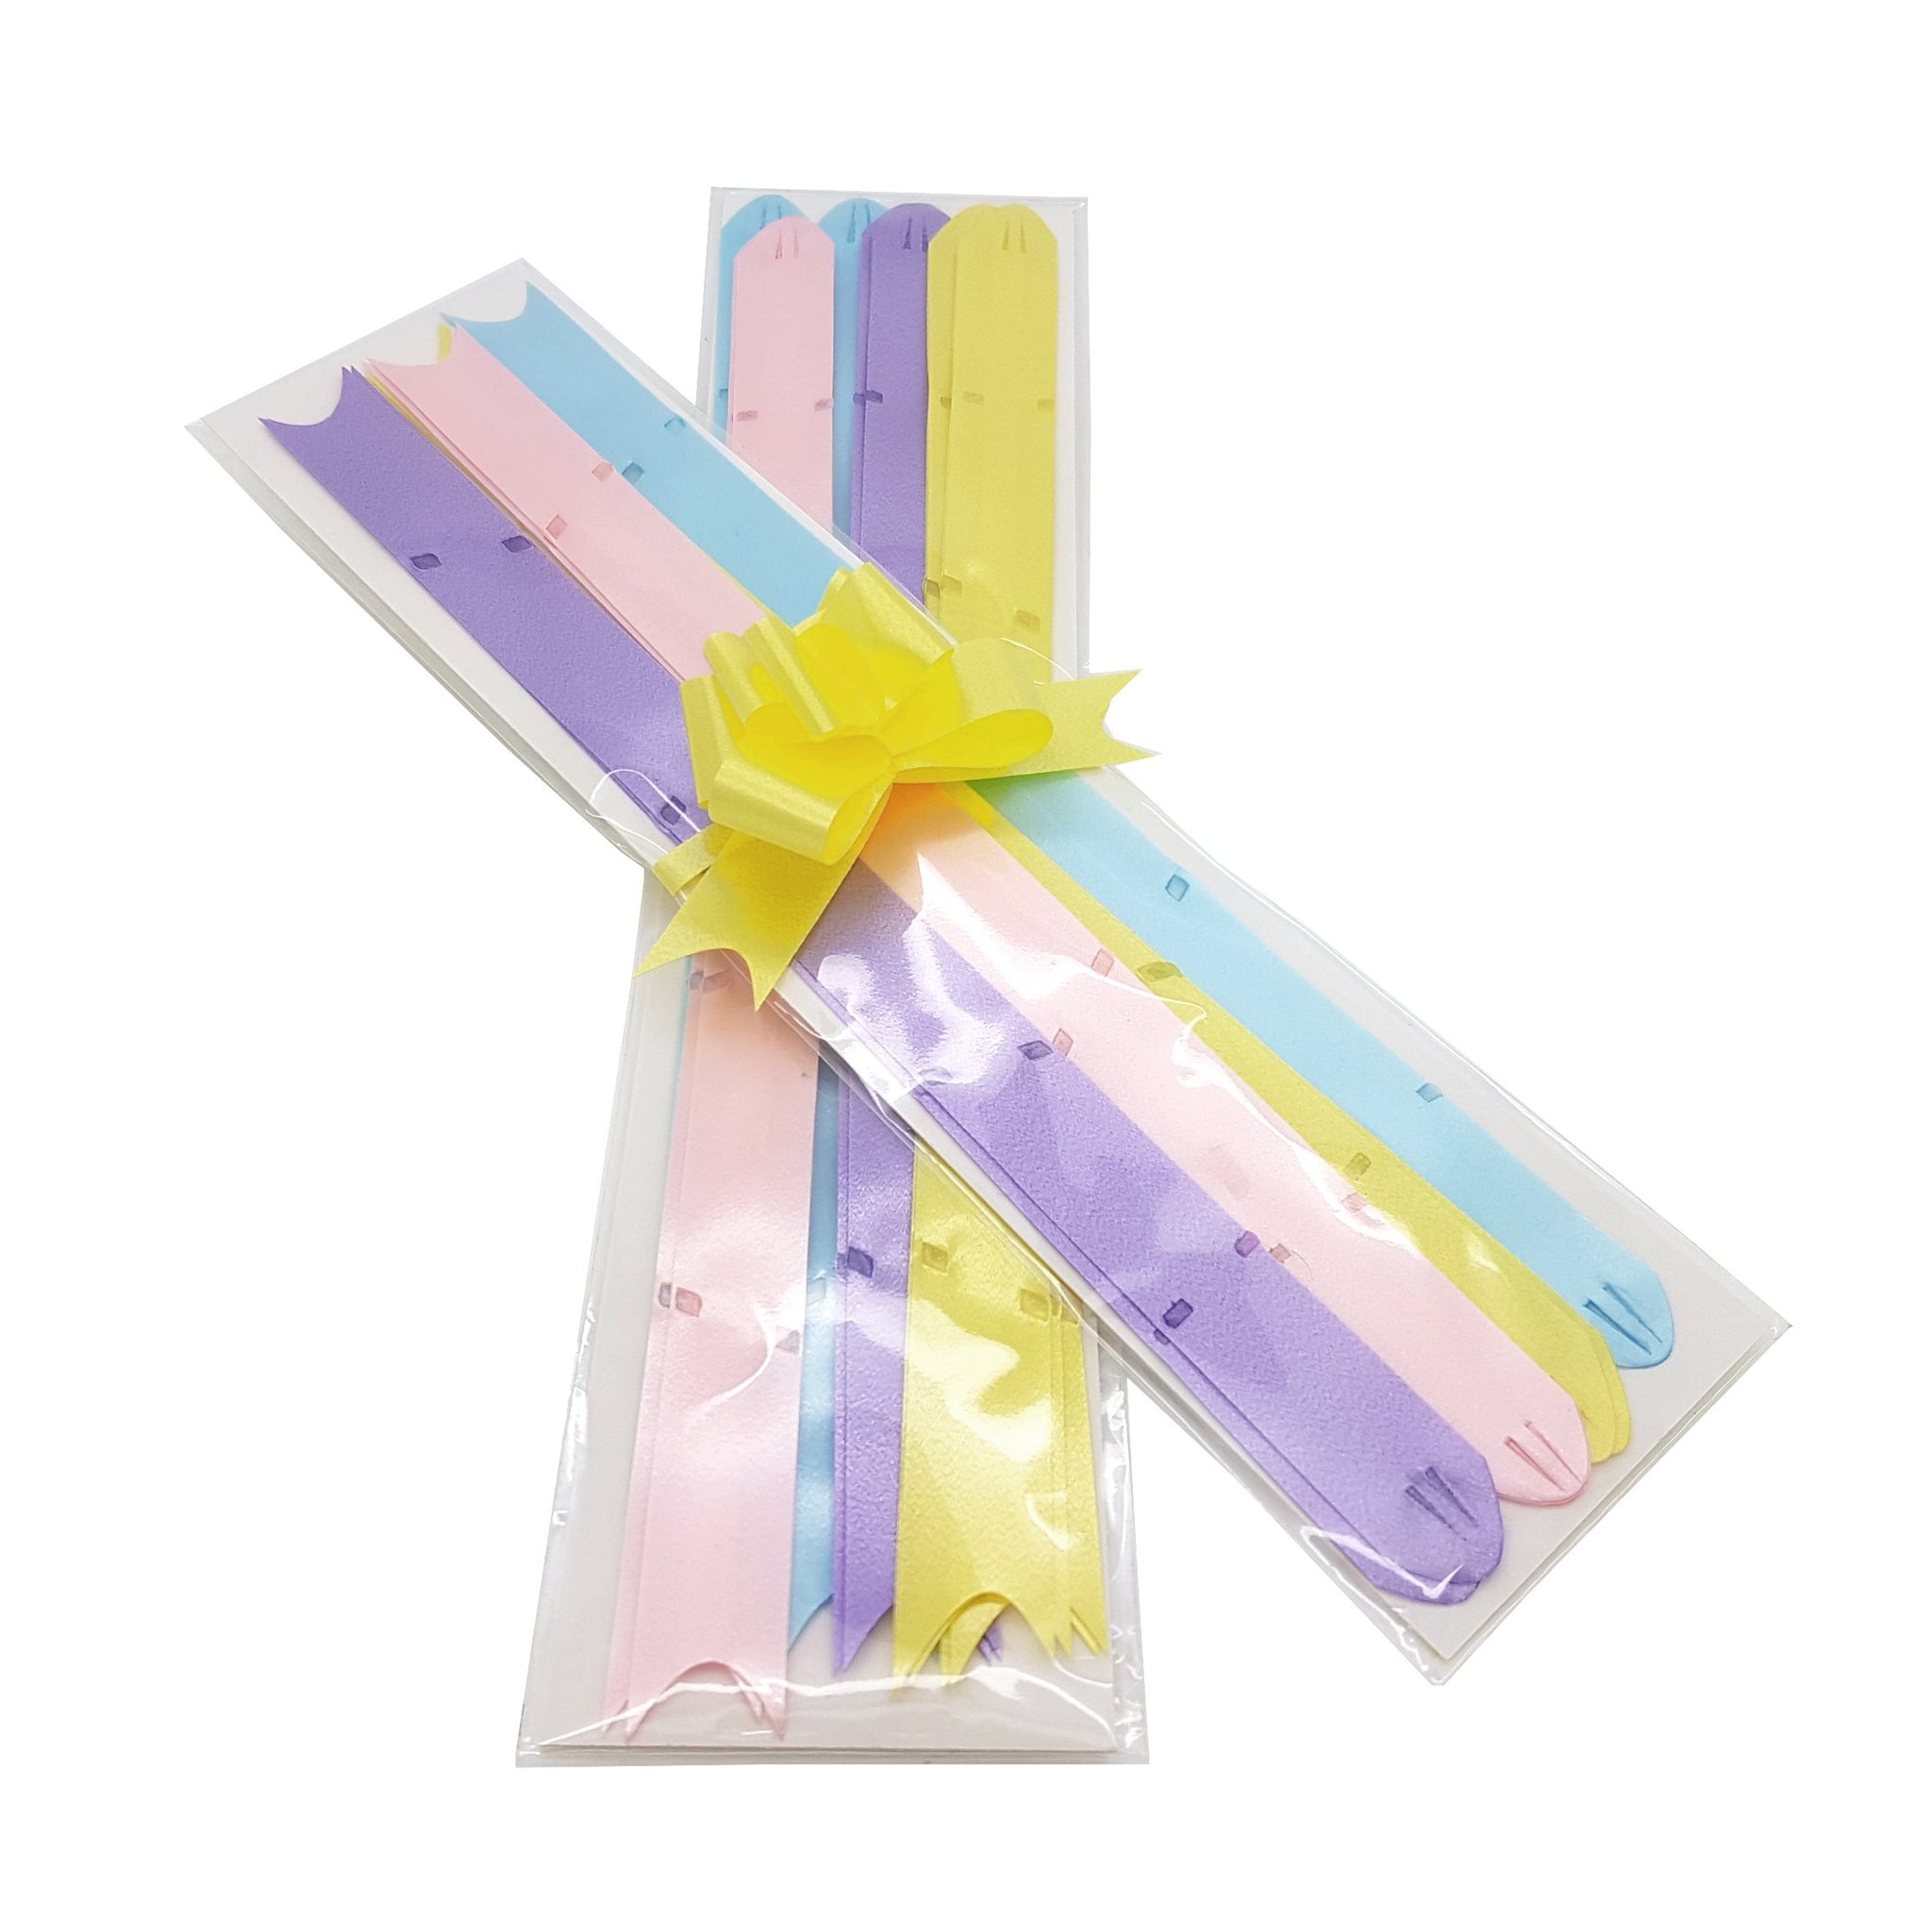 Pastel Gift Bows - Pack of 10-Easter Gift Bow Selection